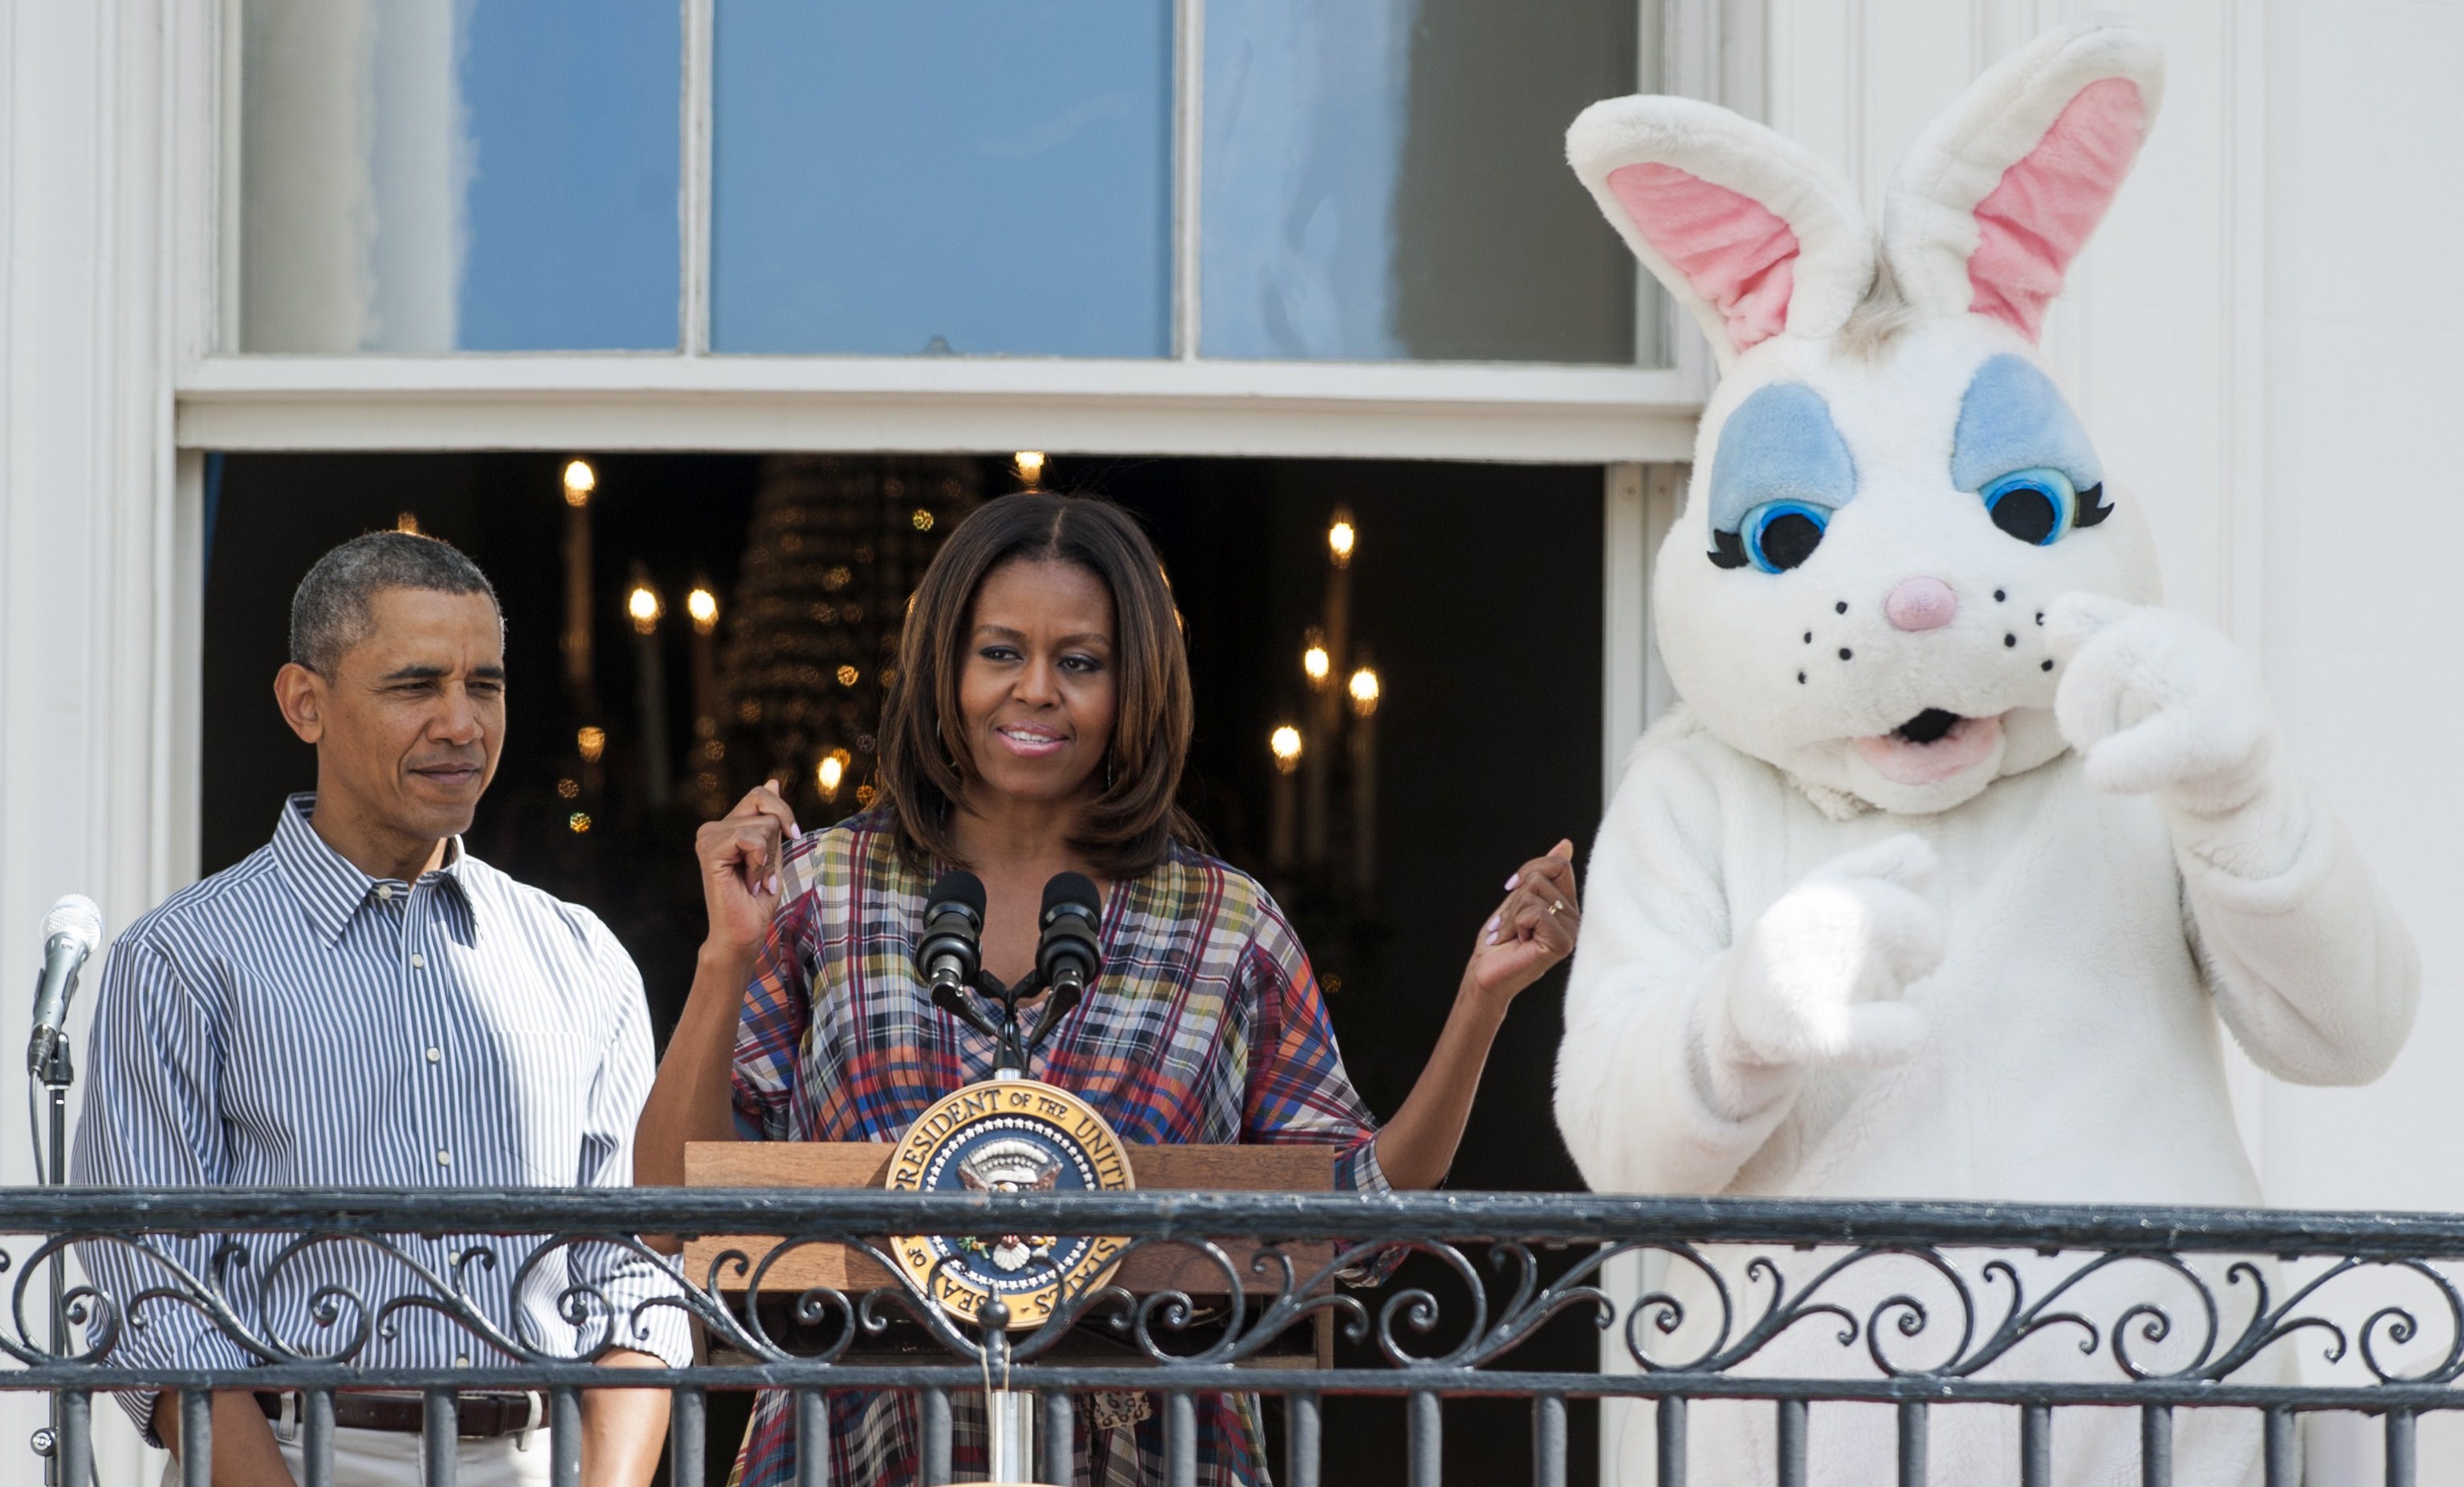 U.S. First Lady Michelle Obama speaks alongside President Barack Obama and the Easter Bunny during the annual White House Easter Egg Roll on the South Lawn of the White House in Washington, D.C., on April 21, 2014 (SAUL LOEB&mdash;AFP/Getty Images)